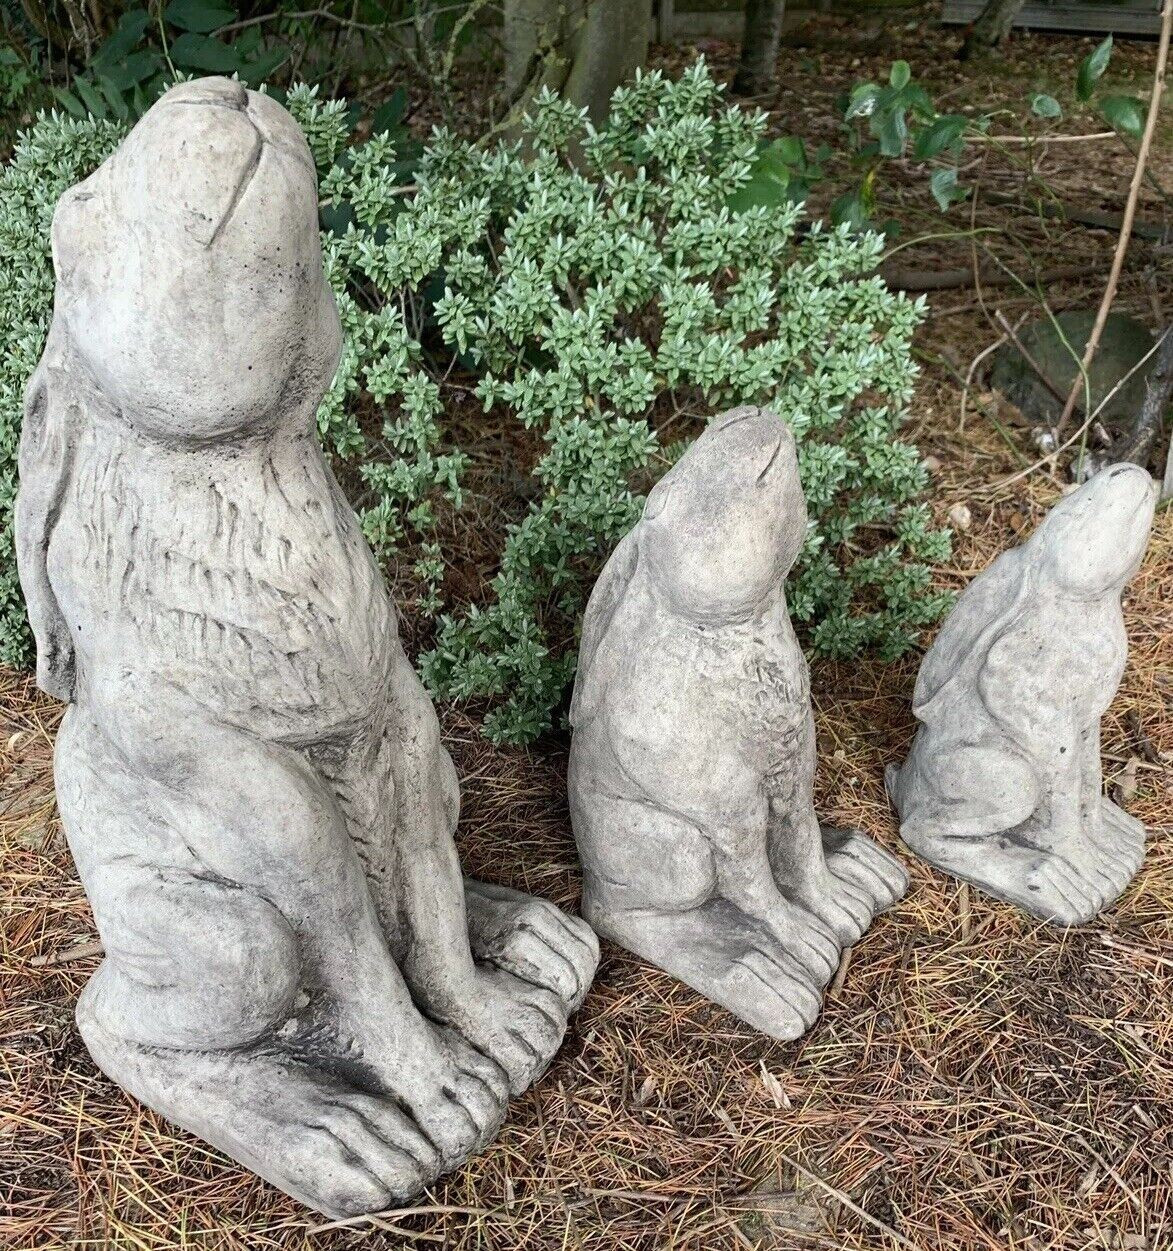 STONE GARDEN FAMILY FULL SET OF RUSTIC MOON GAZING HARE ORNAMENTS